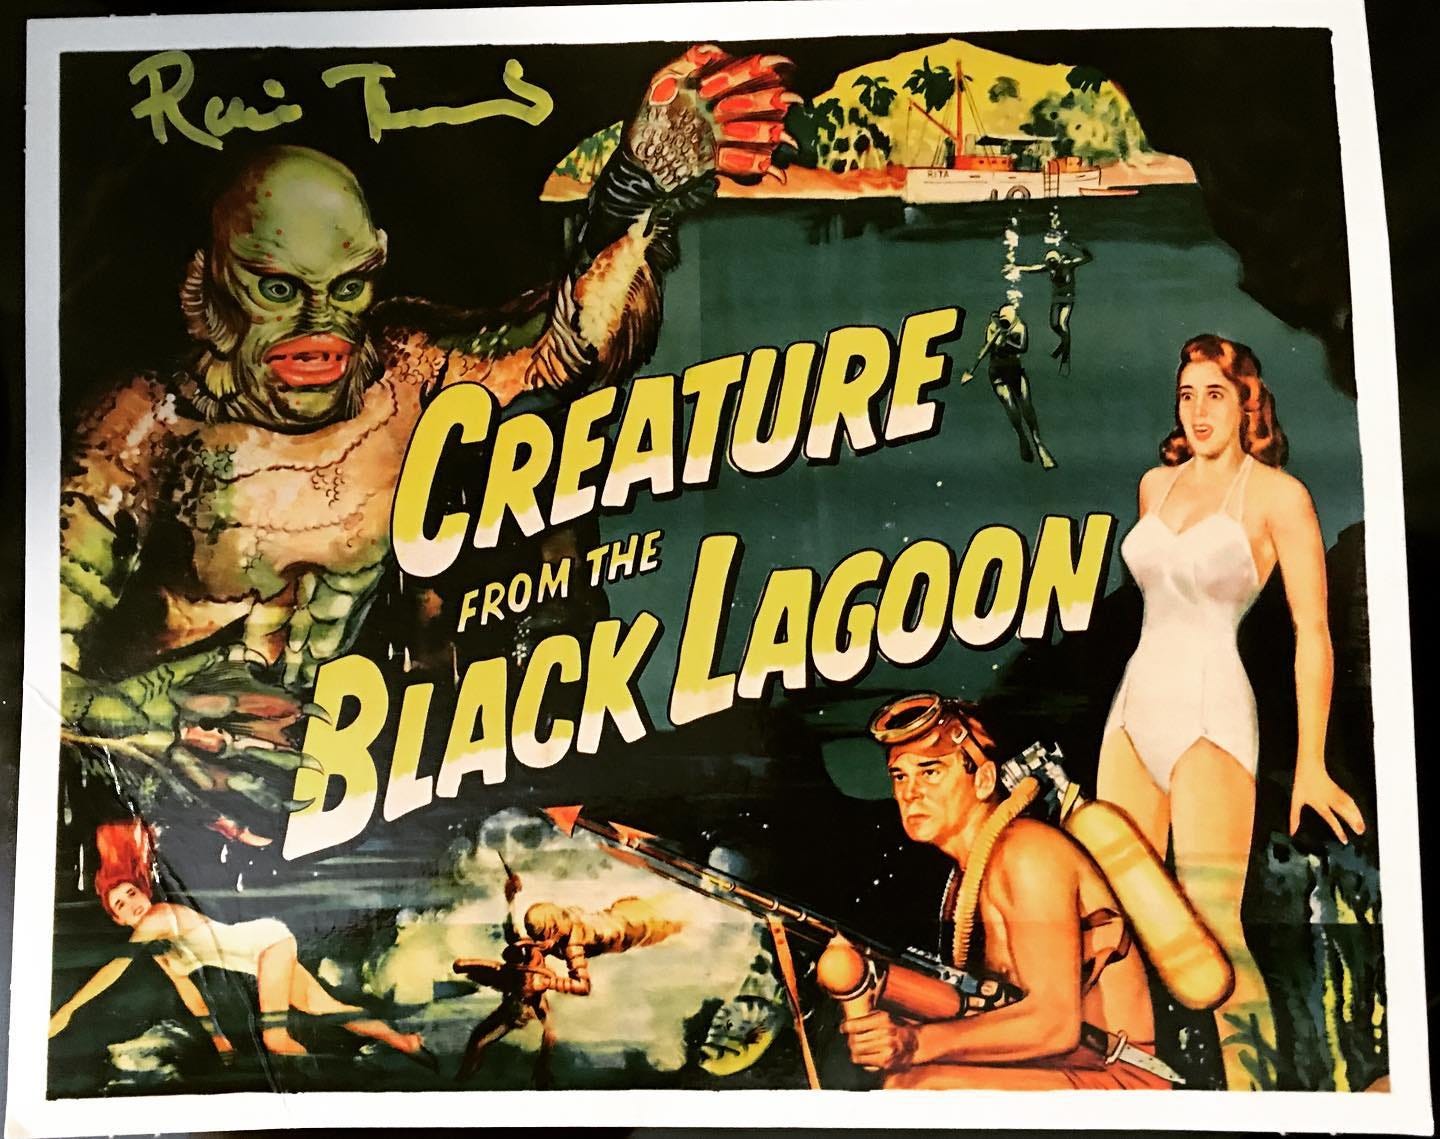 May be an image of 2 people, people smiling and text that says 'CREATURE THE LAGOON FROM BLACK'